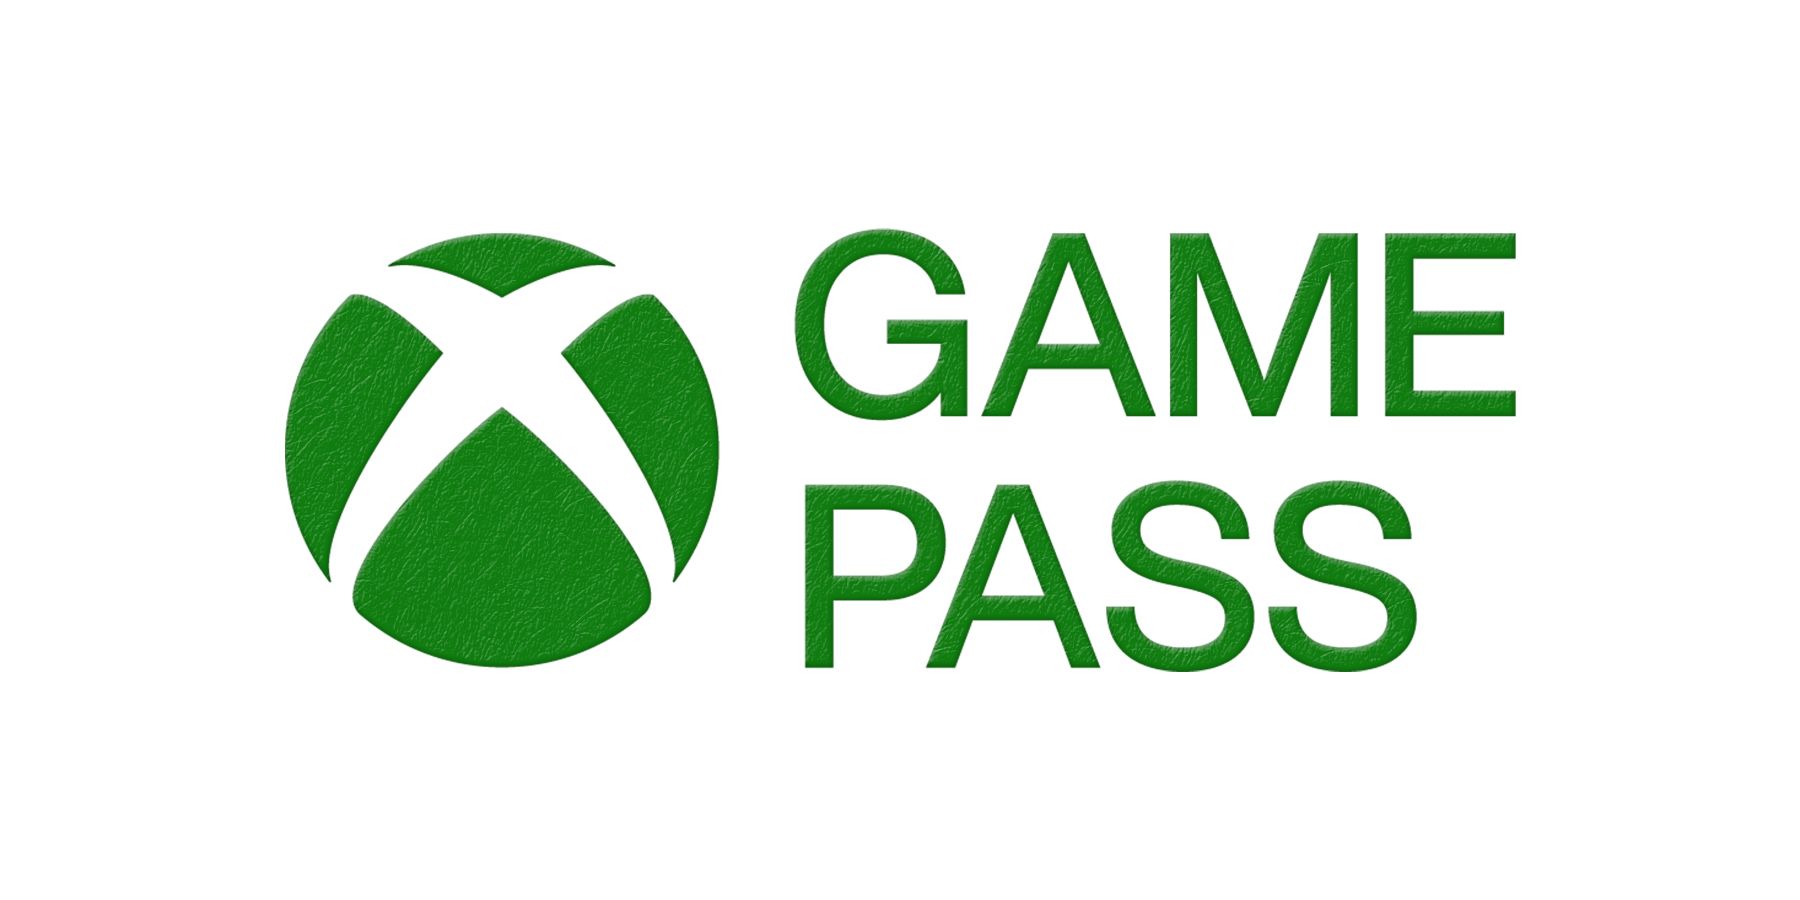 Title optimization: Leaker Claims Call of Duty May Not Be Coming to Game Pass-content-image